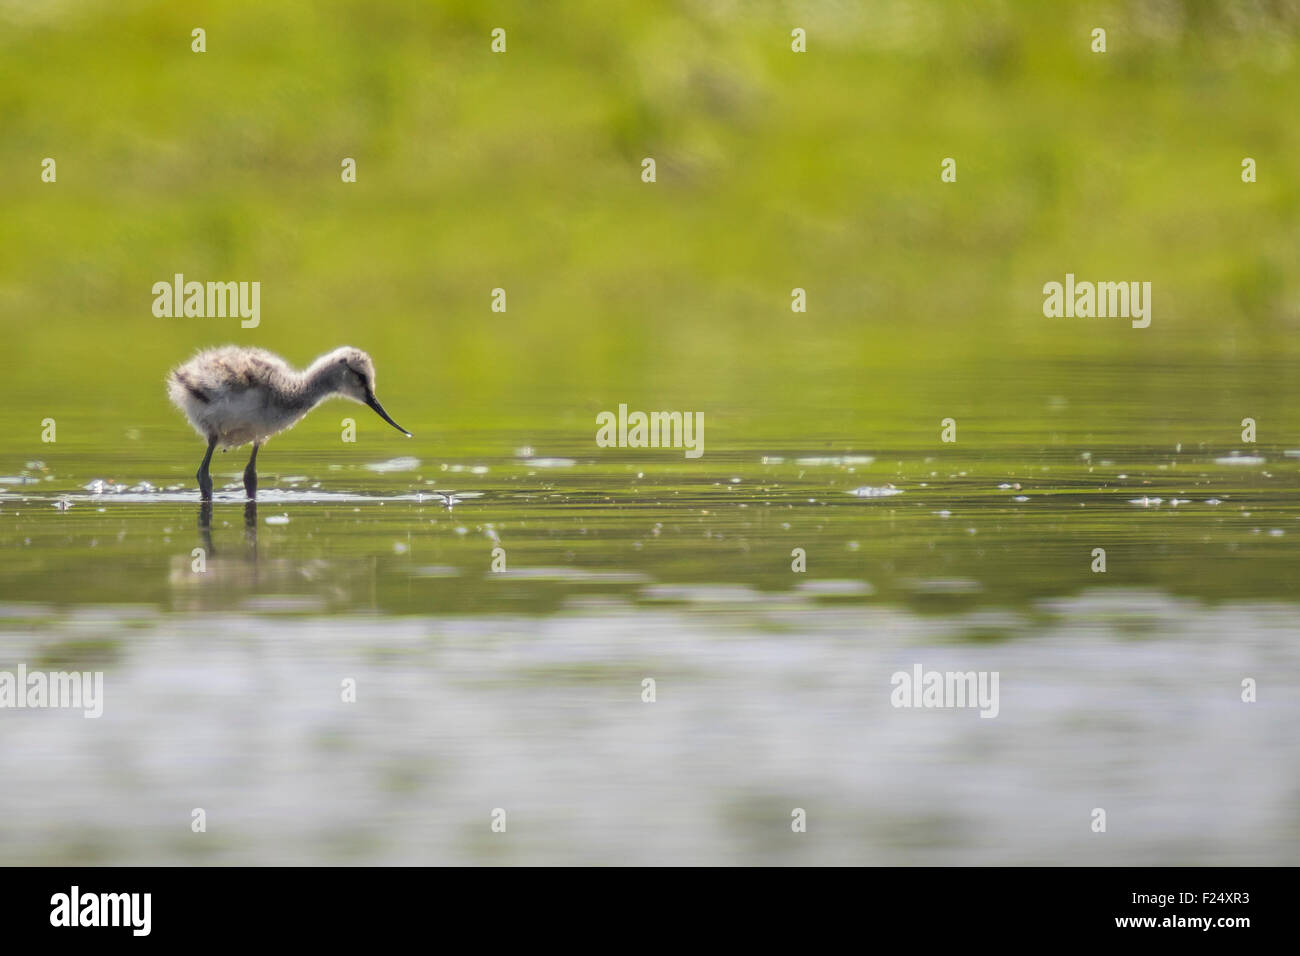 Pied Avocet chick, Recurvirostra avosetta, walking in water in search for food. Stock Photo